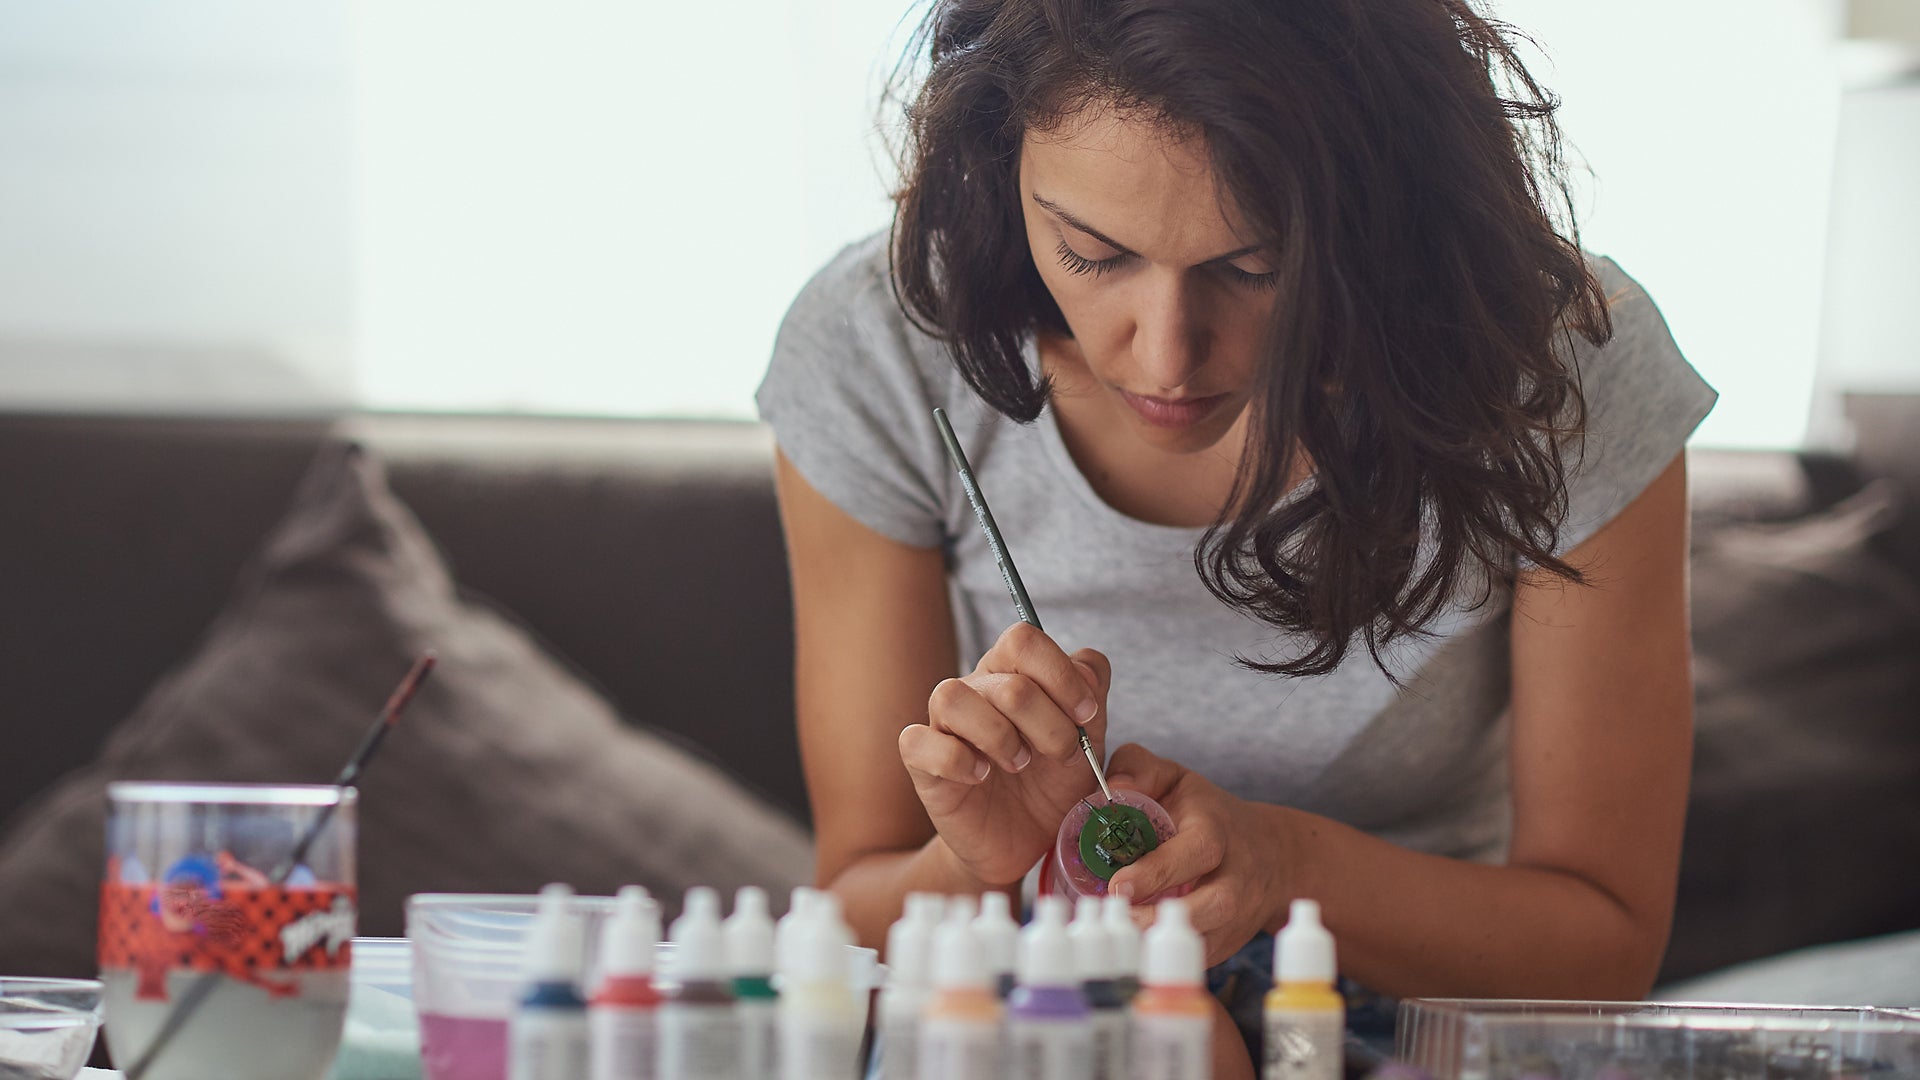 How to paint miniatures: A step-by-step beginner's guide